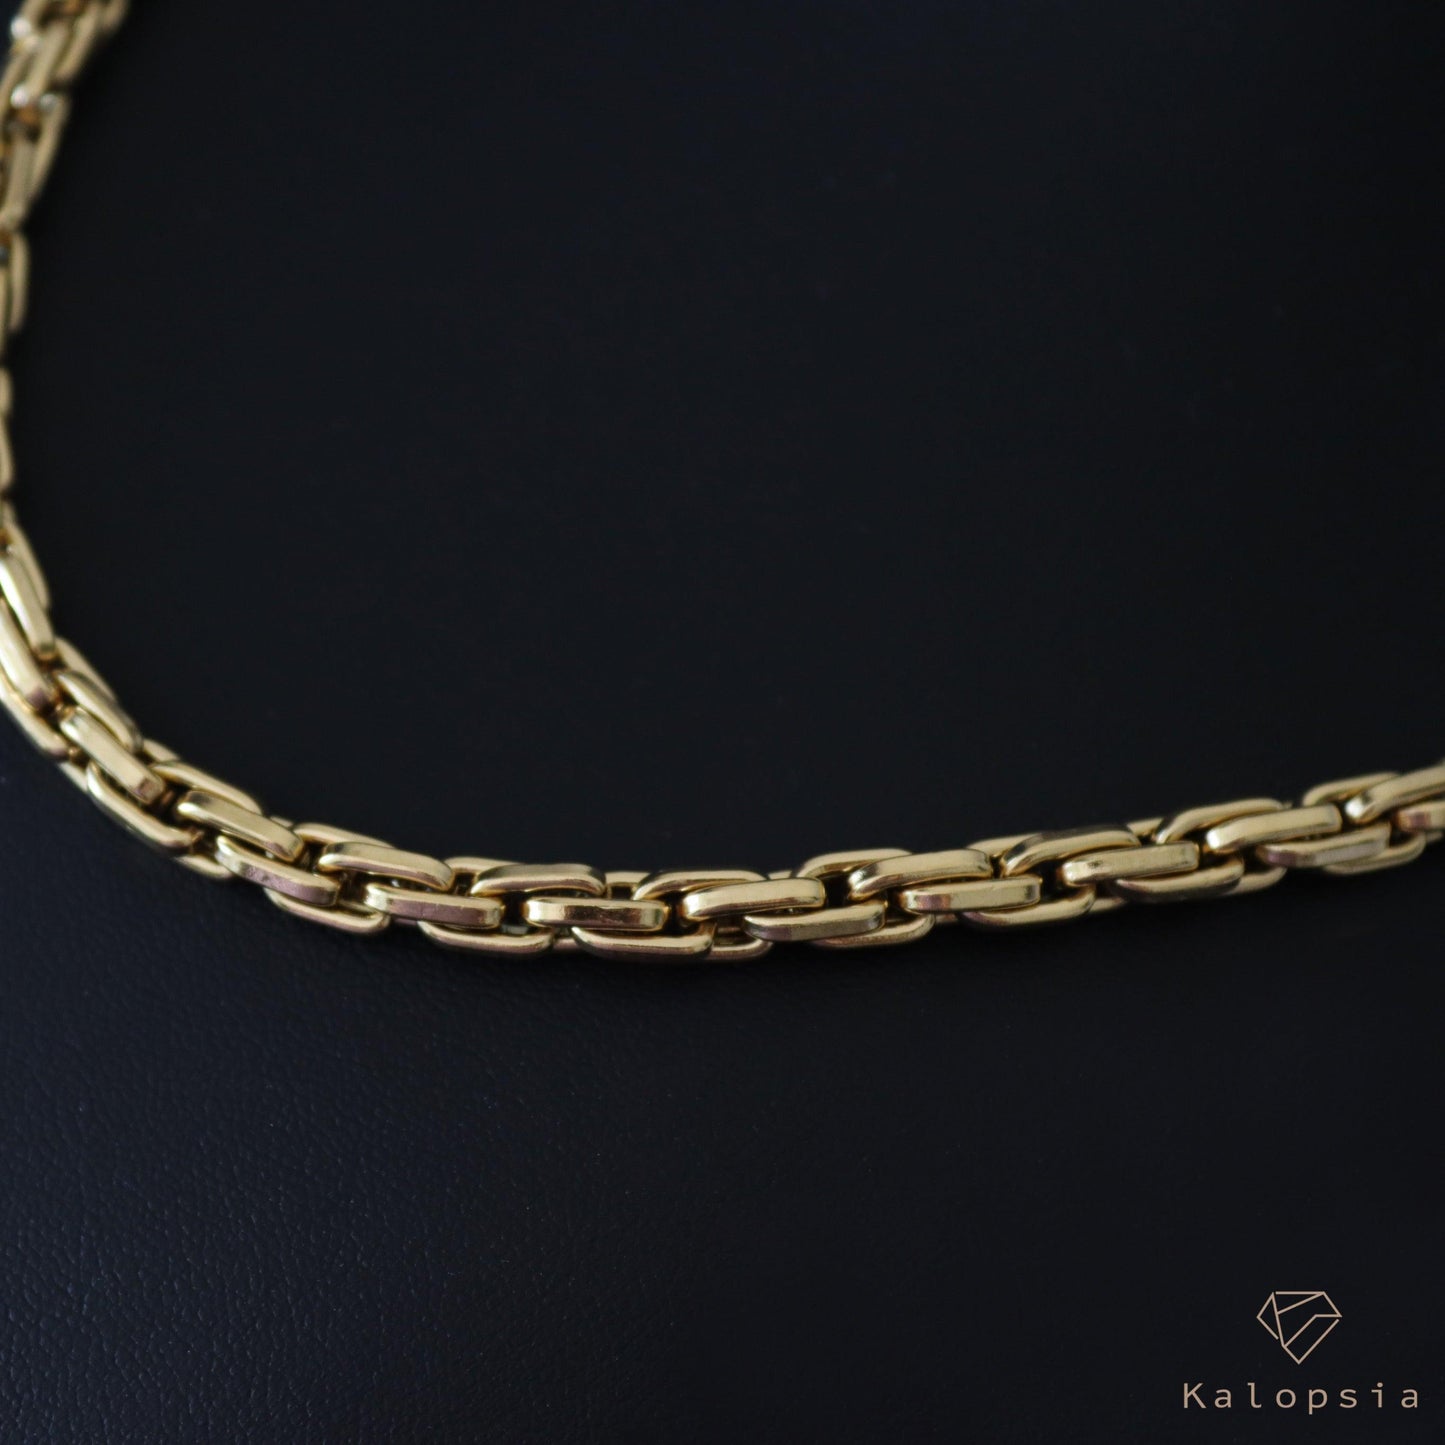 Clavicle Chain Choker Necklace - Kalopsia Accessories